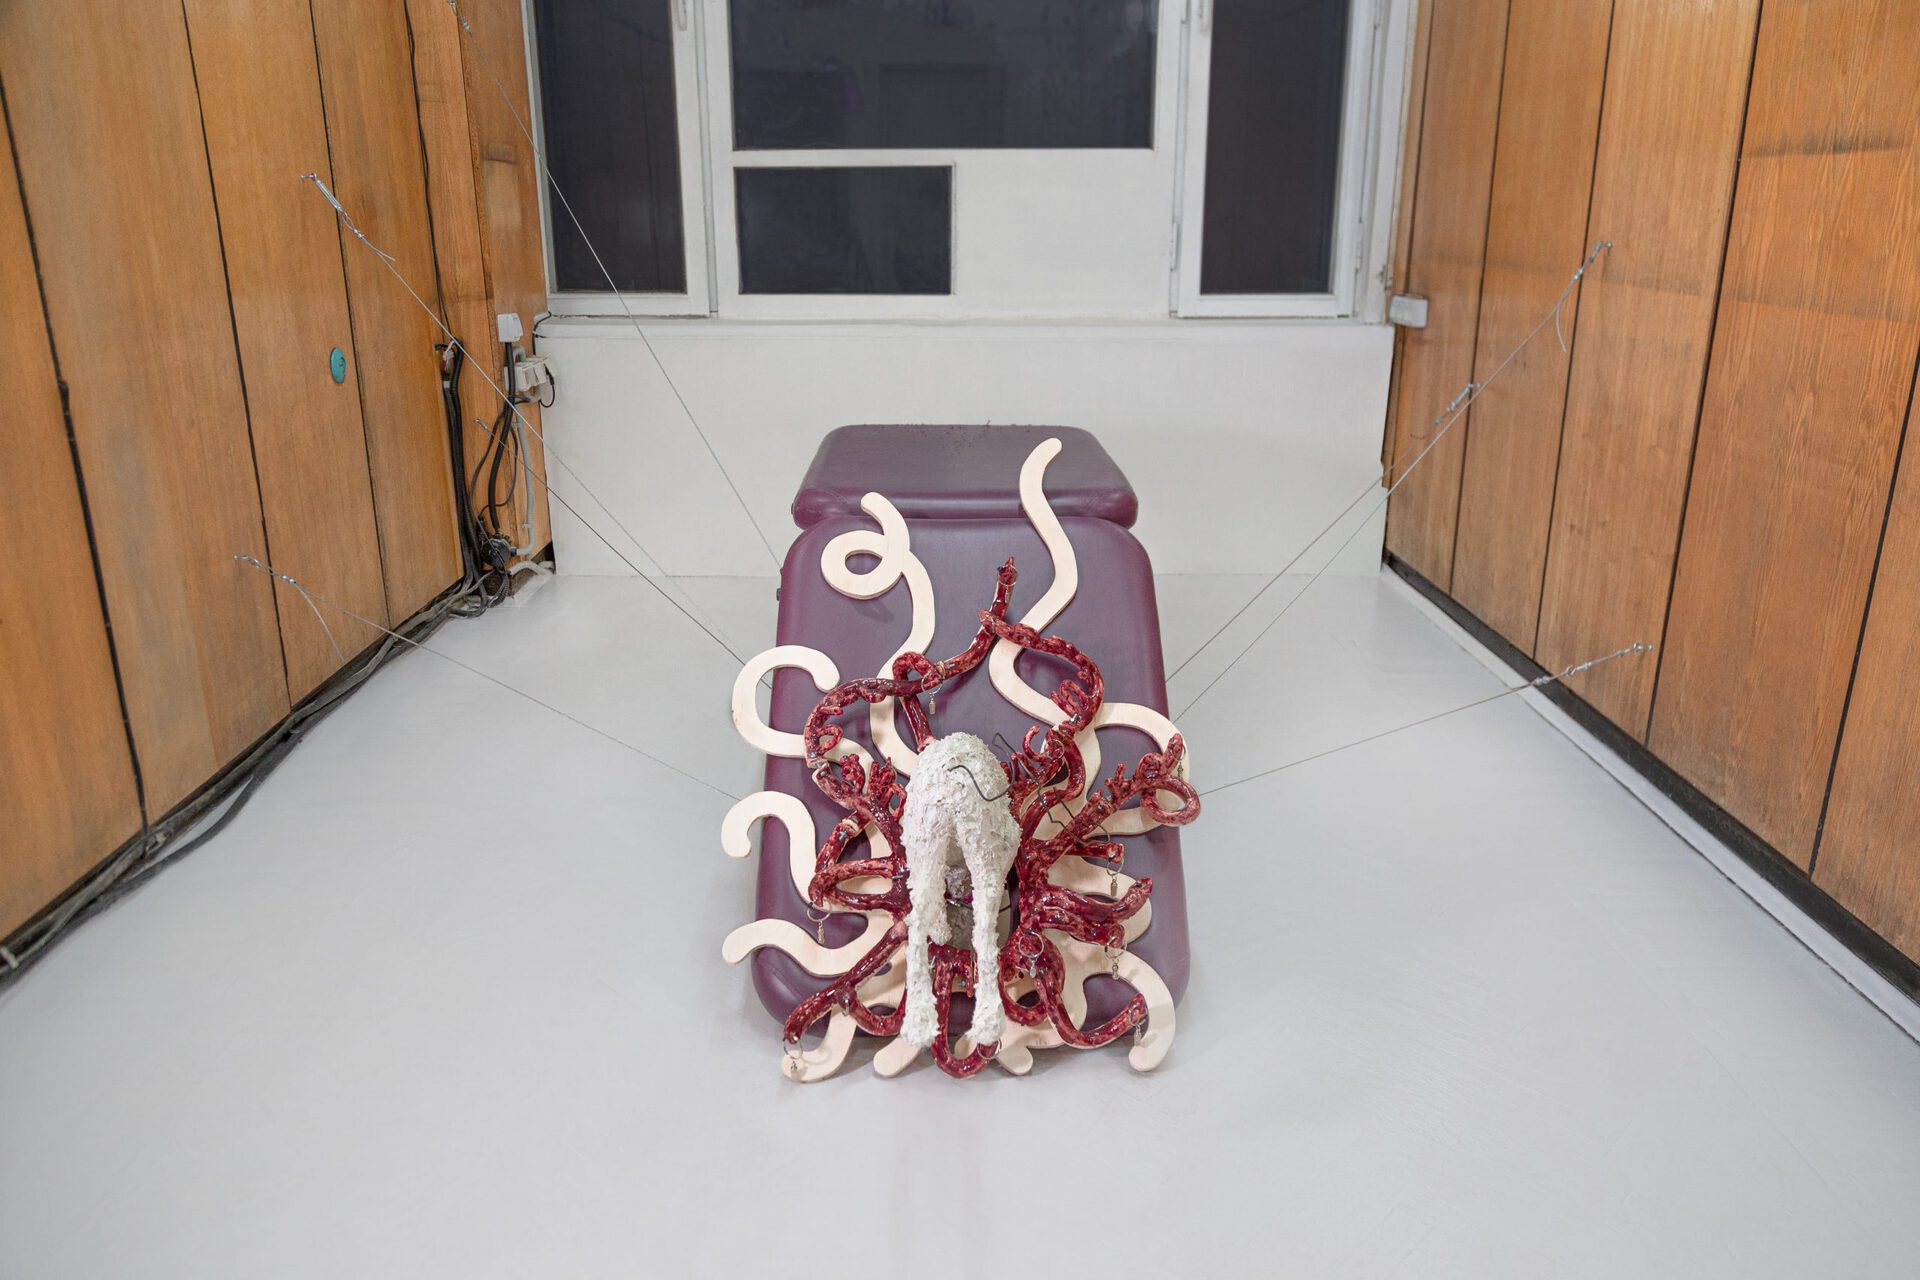 Stasia Grishina Space Dogs, 2022, massage table, plywood, glazed ceramics, styrofoam, gypsum, dog adress tags with key rings, wire, collar, steel cables, rigging; 180x70x60 cm